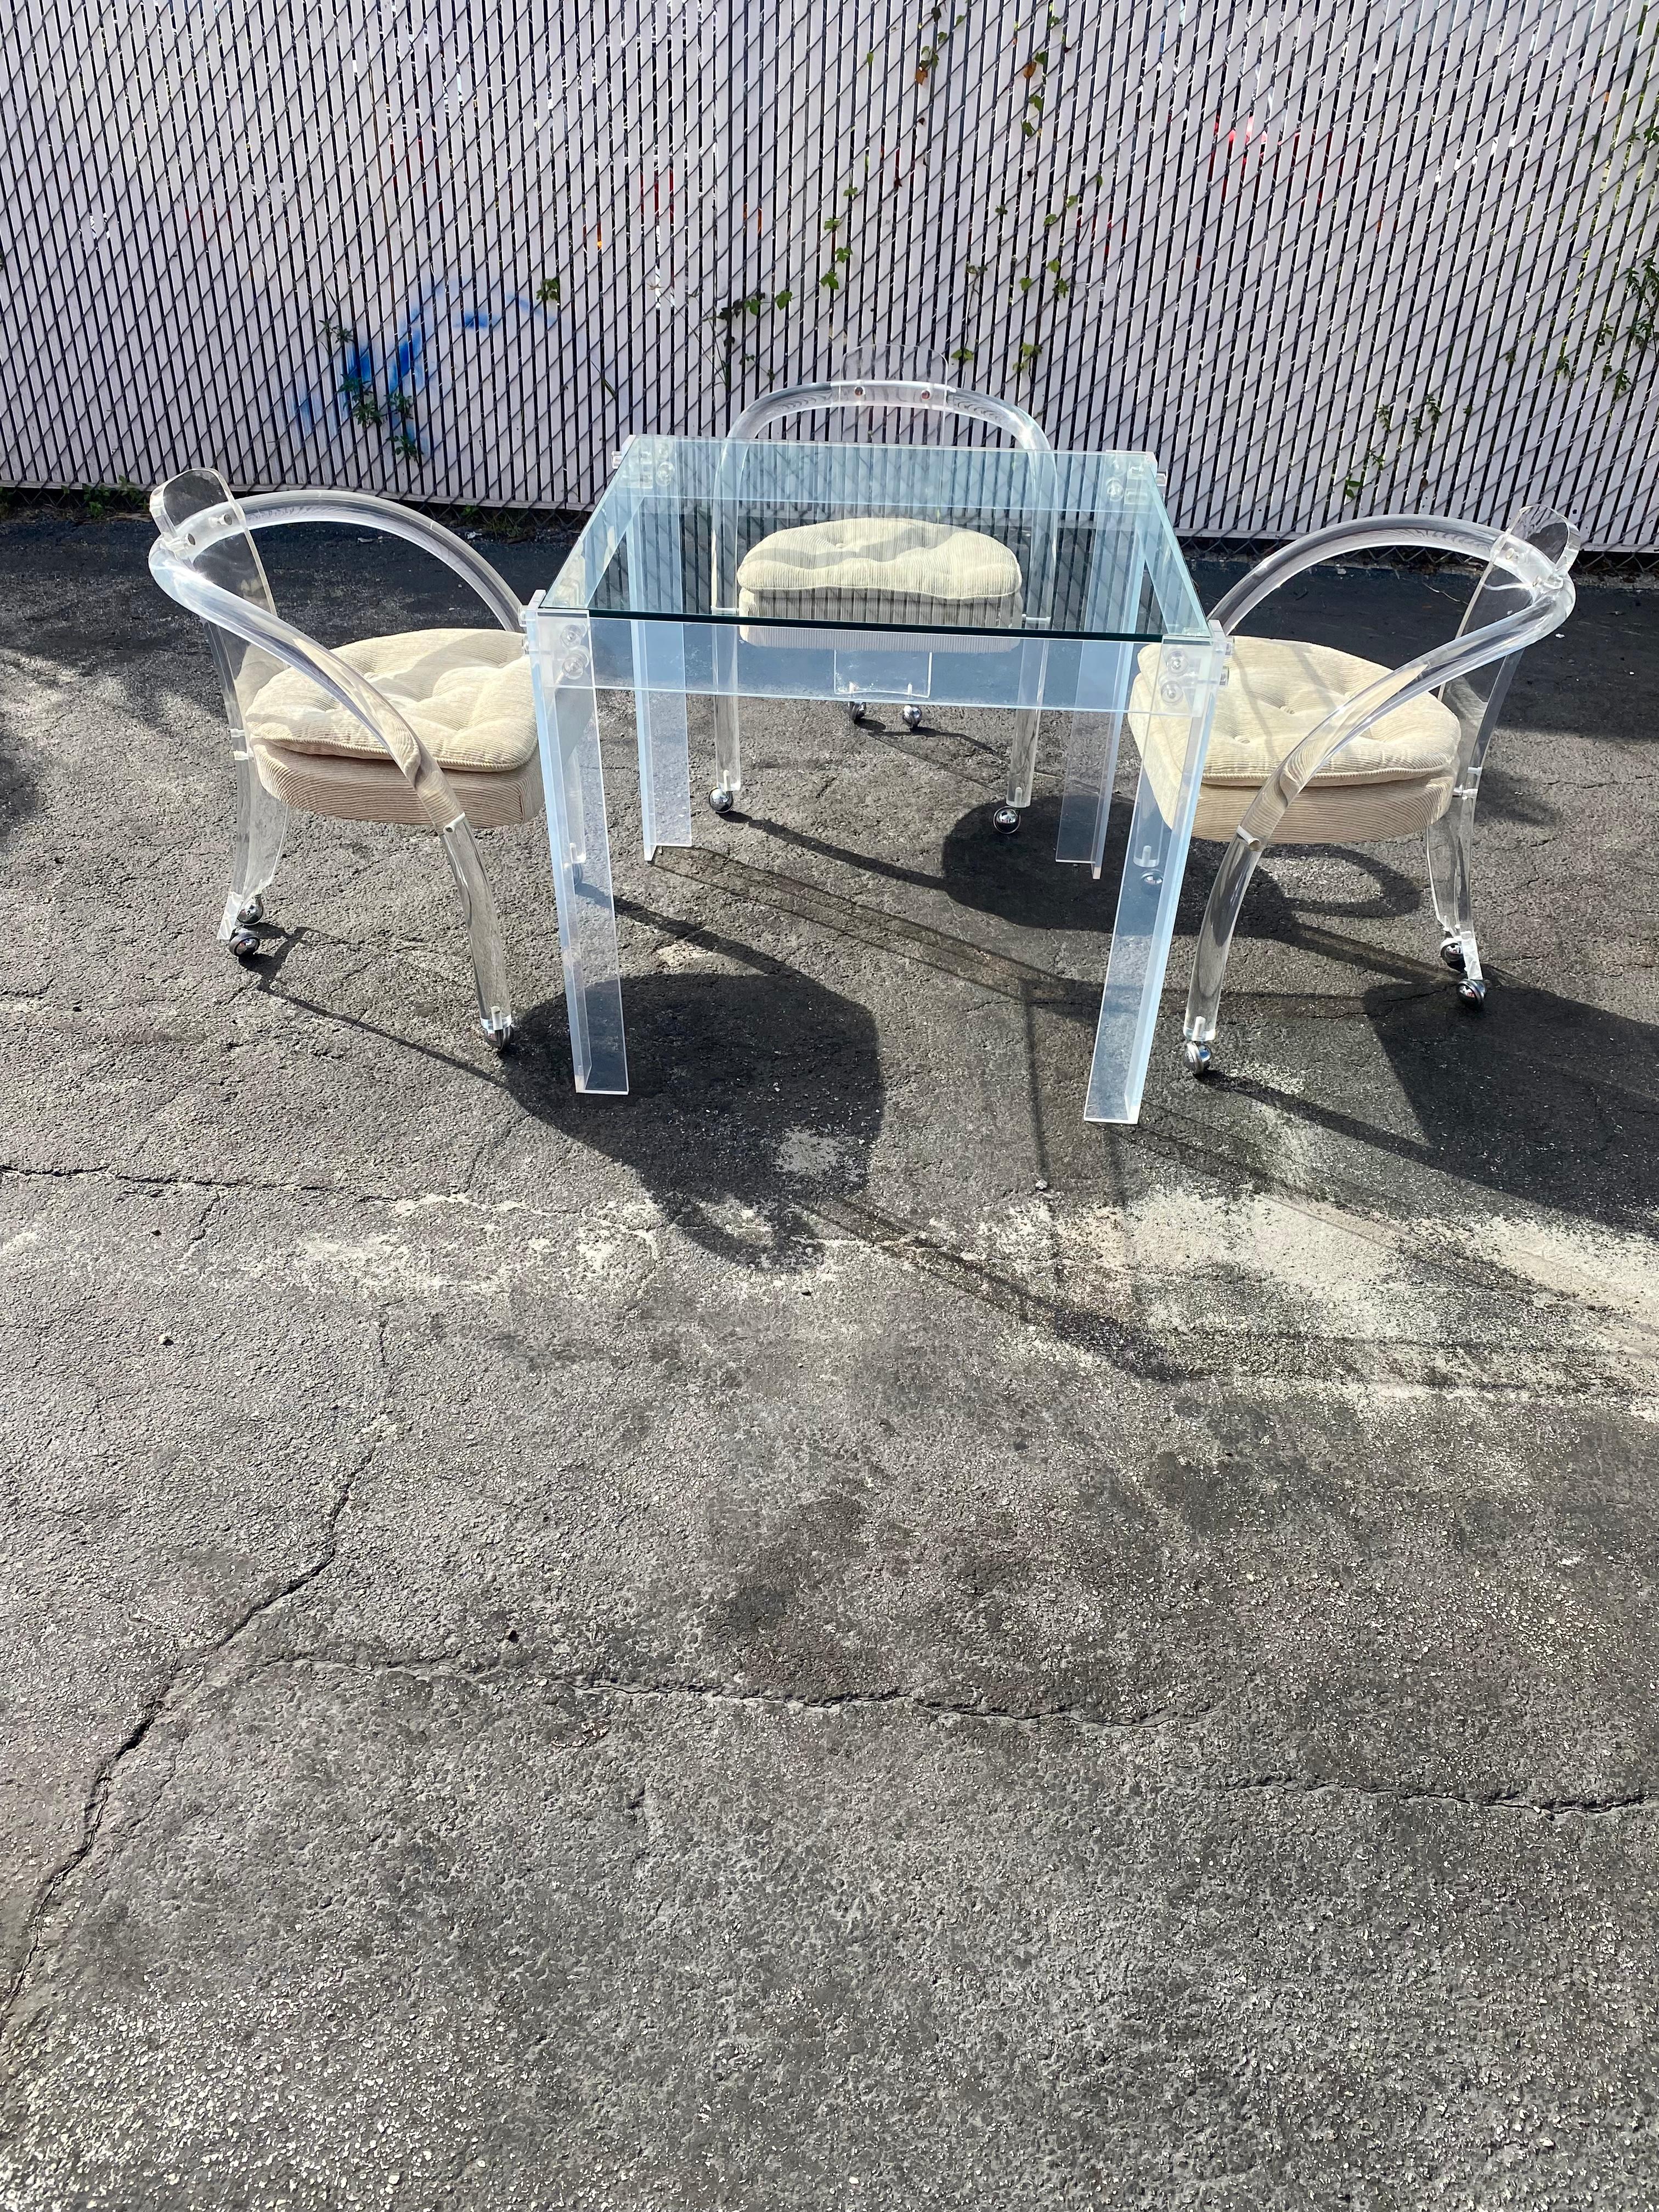 On offer on this occasion is one of the most stunning lucite table set you could hope to find. This is an ultra-rare opportunity to acquire what is, unequivocally, the best of the best, it being a most spectacular and beautifully-presented